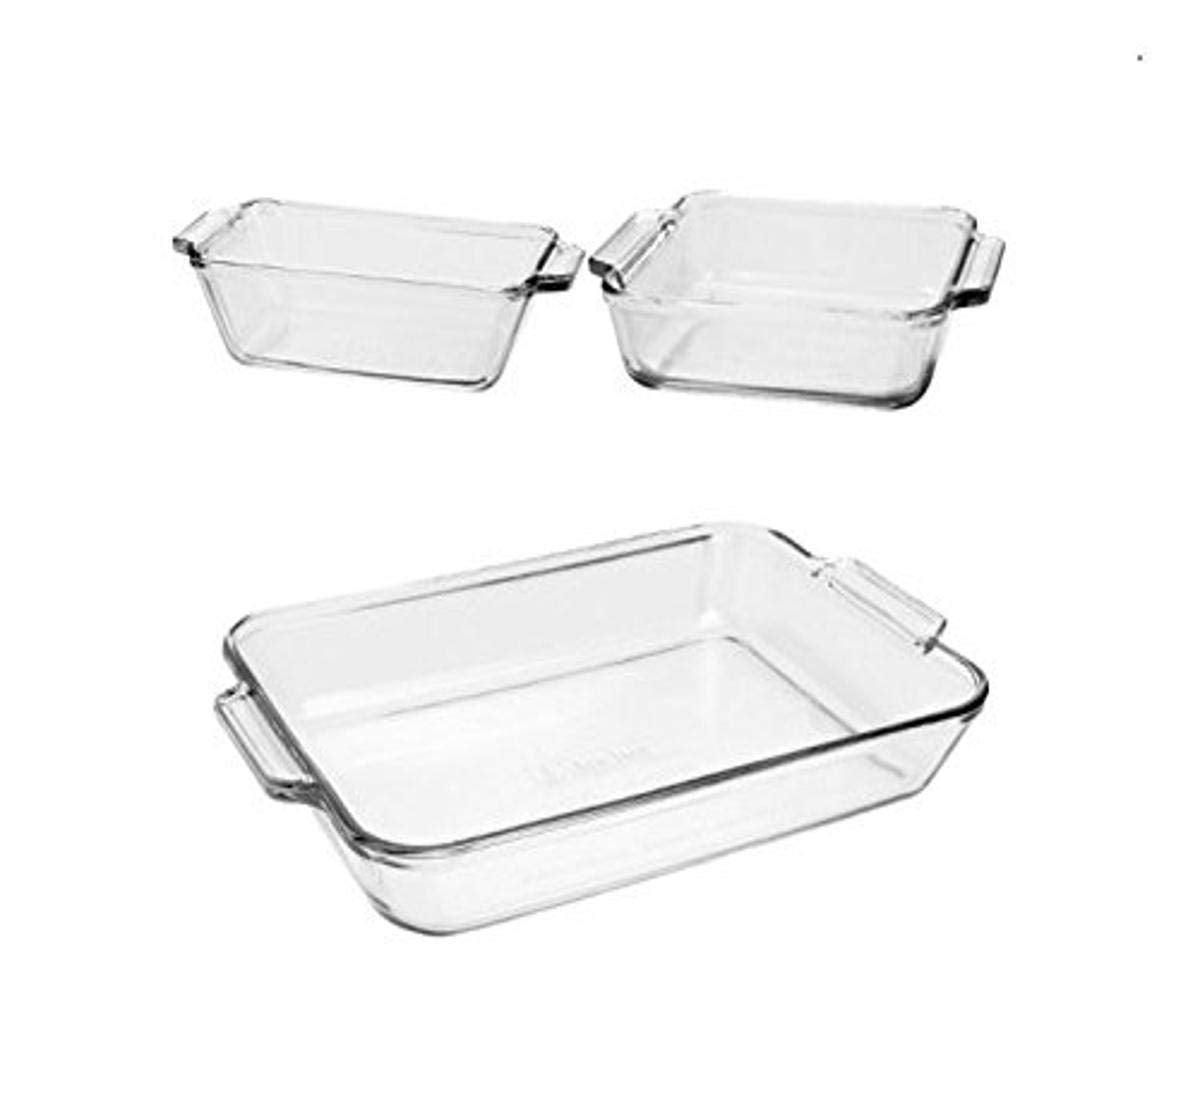 Anchor Hocking Glass Baking Dishes for Oven, 3 Piece Set (3 Qt Glass Casserole Dish, Cake Pan, and Bread Pan) - CookCave